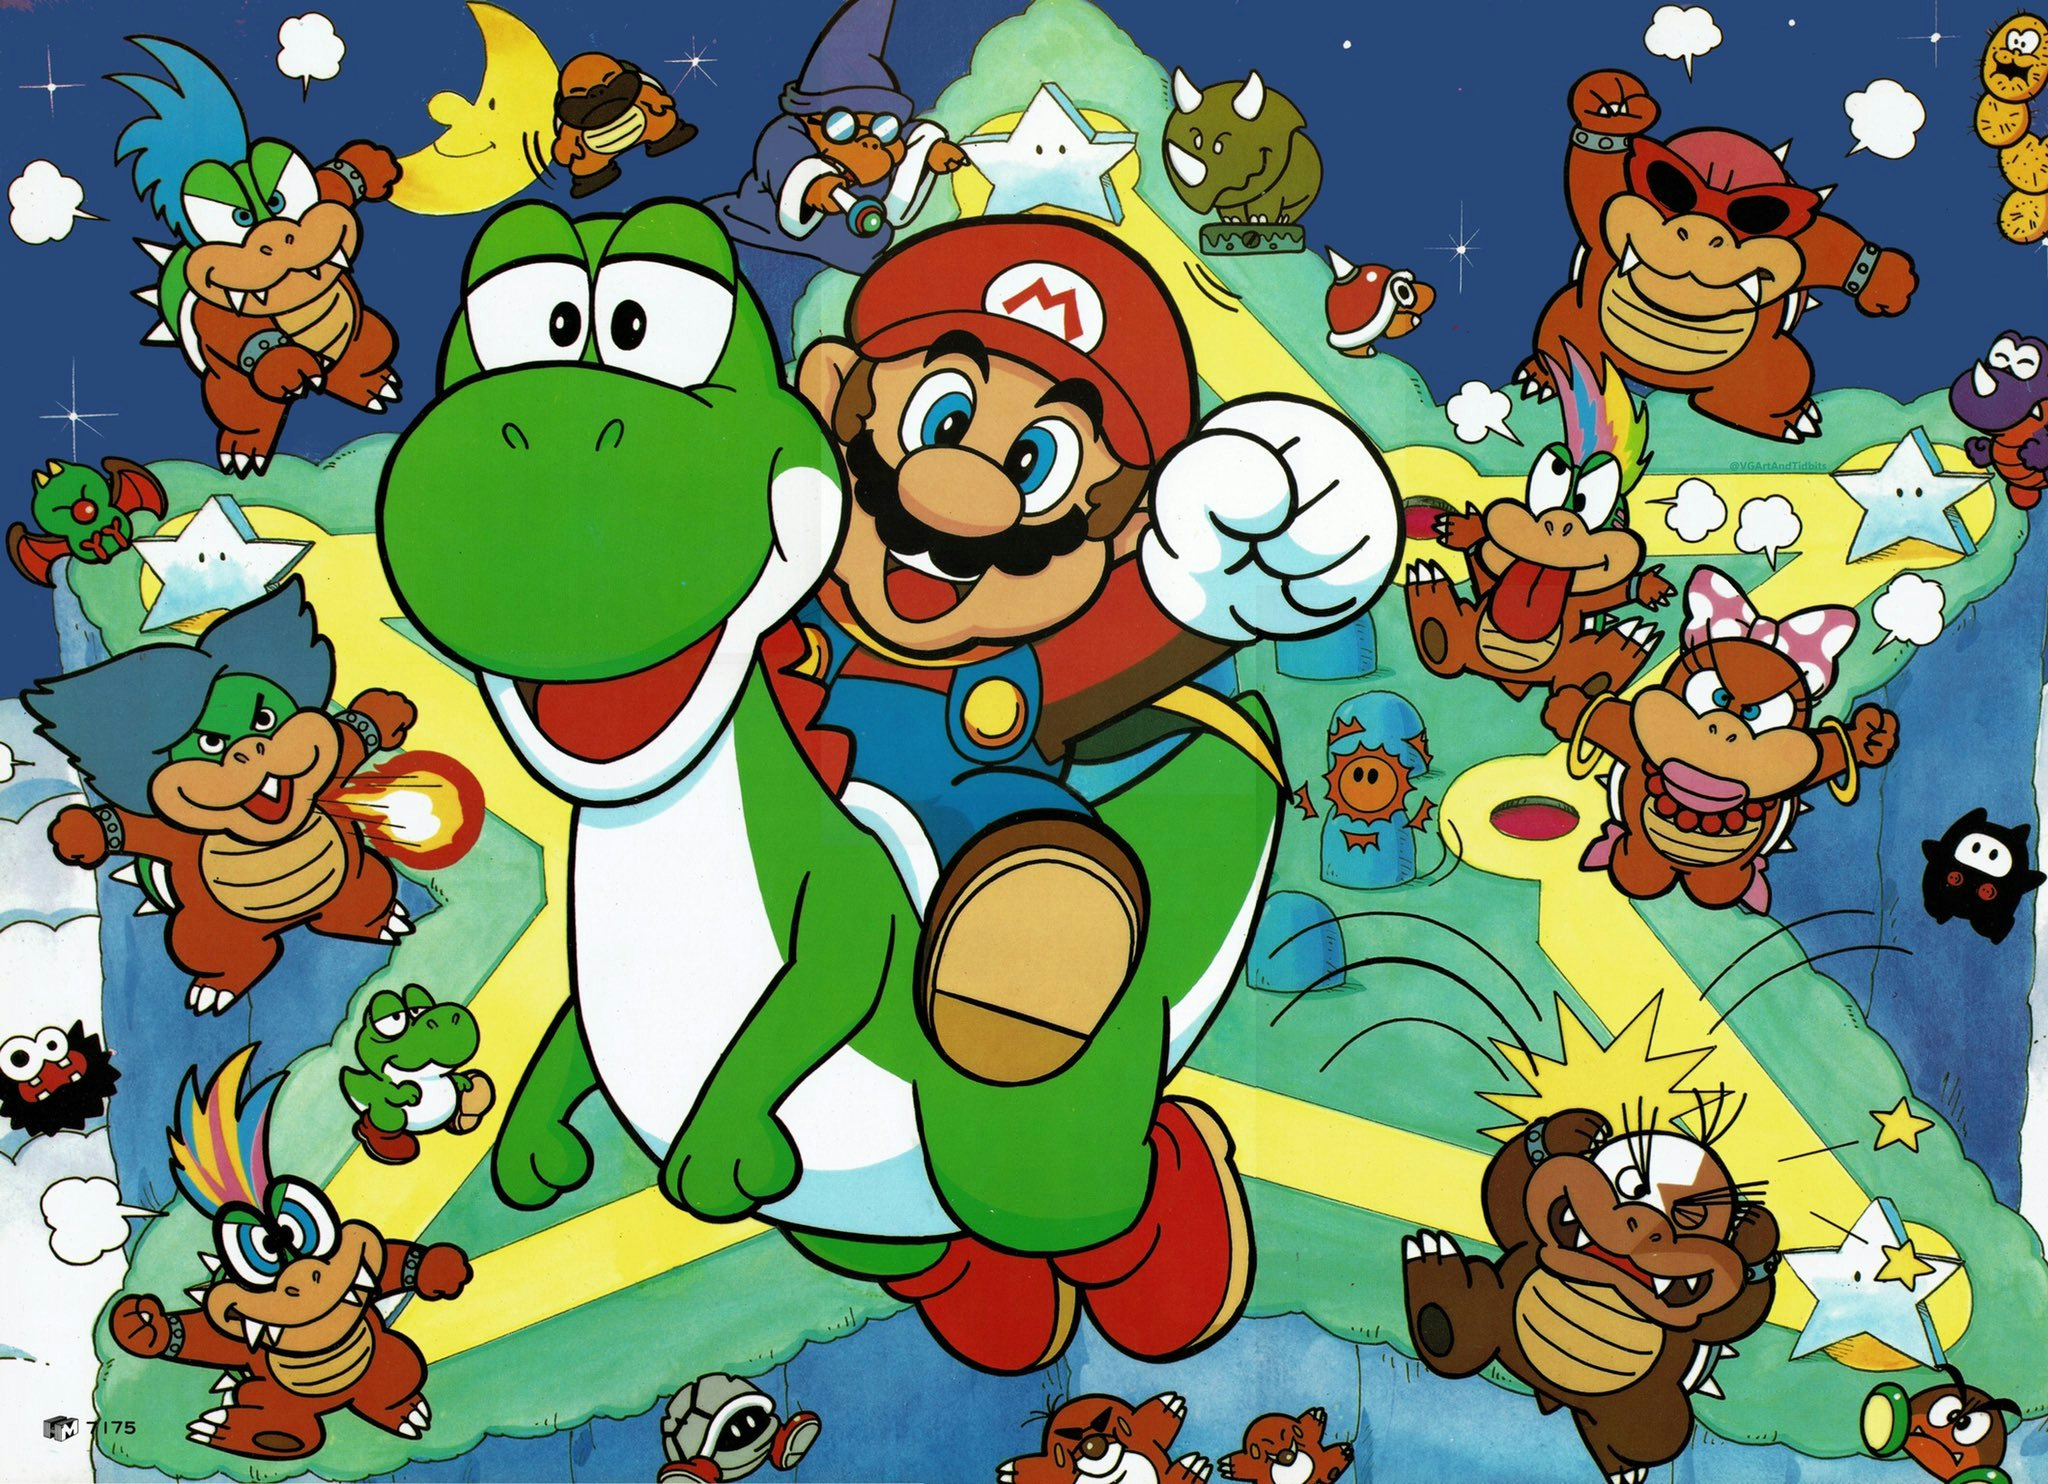 mario games for free on the world wide world